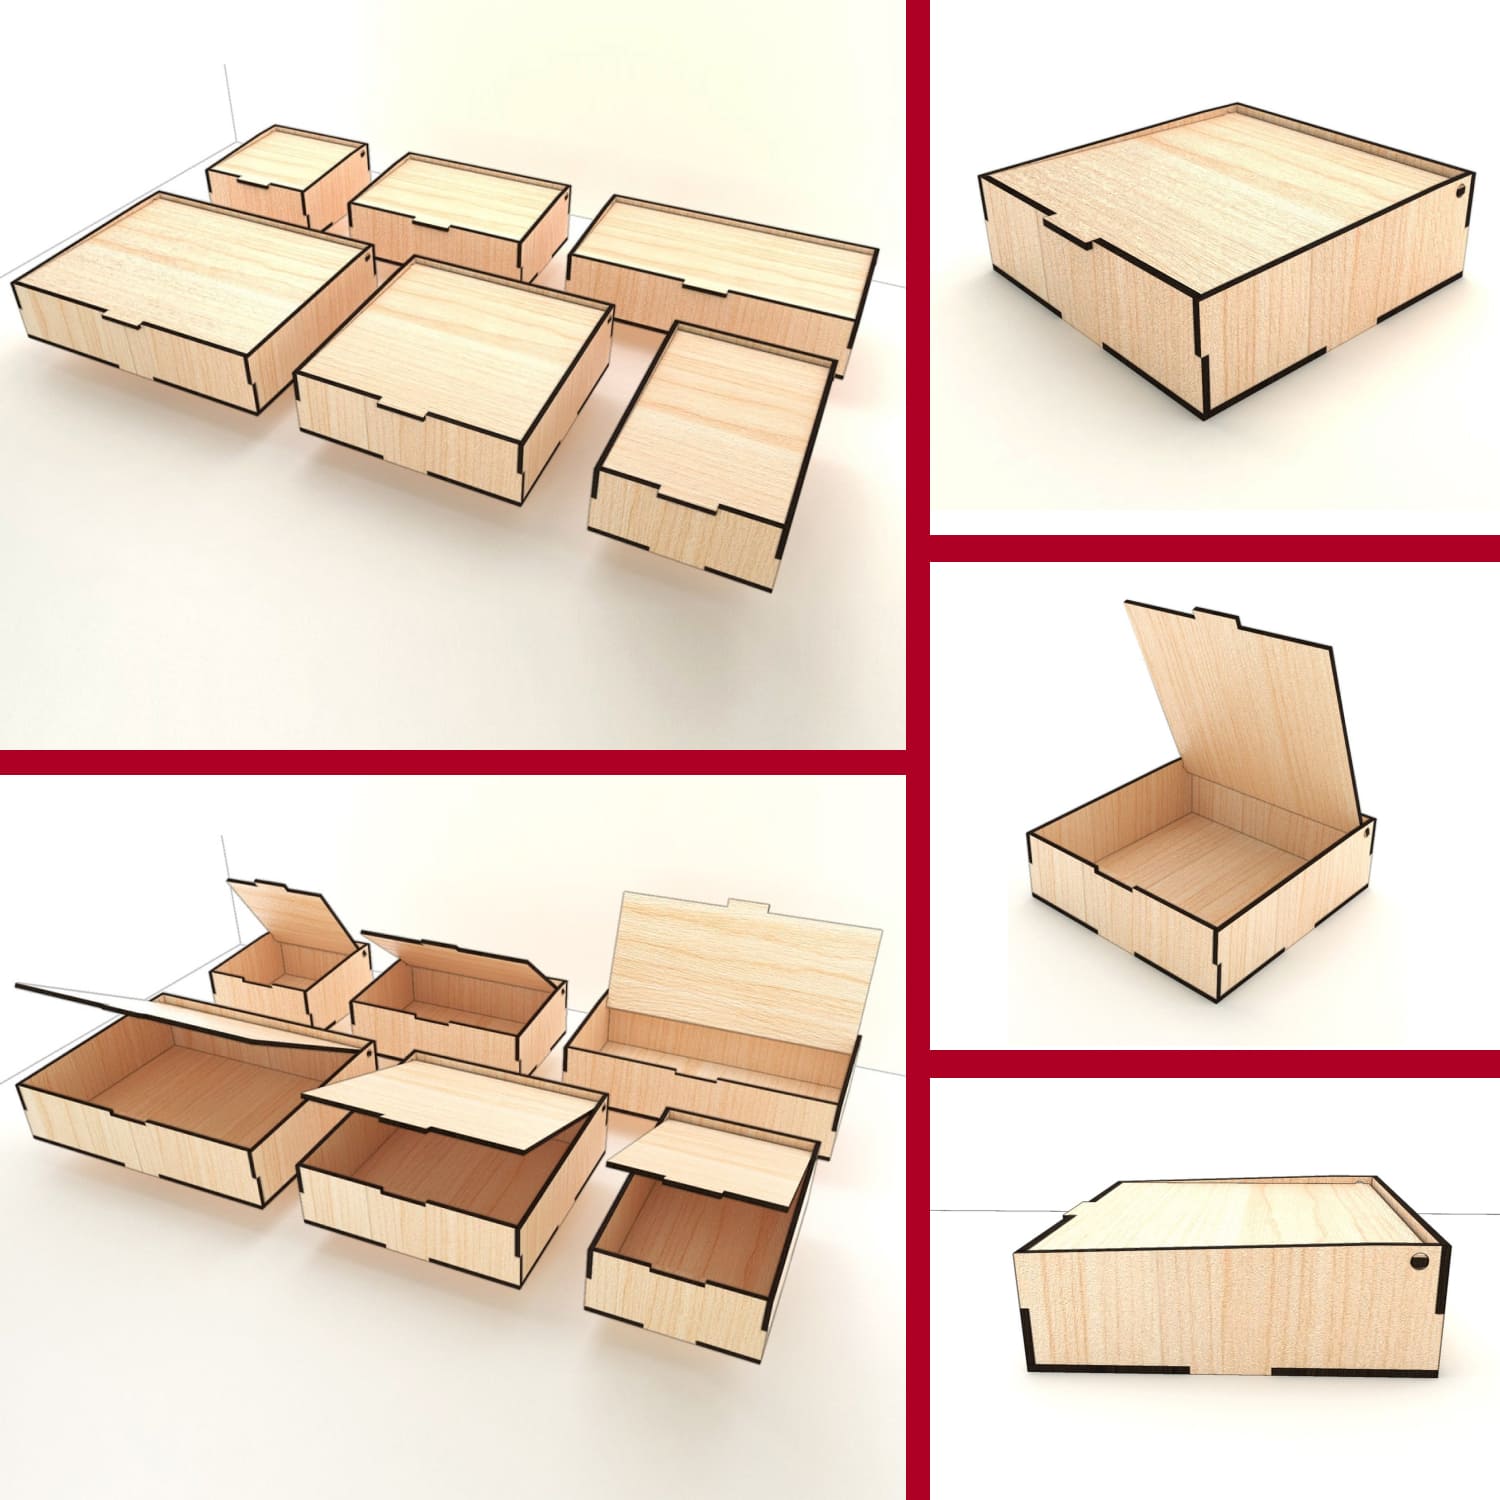 boxes with flip lid cover.